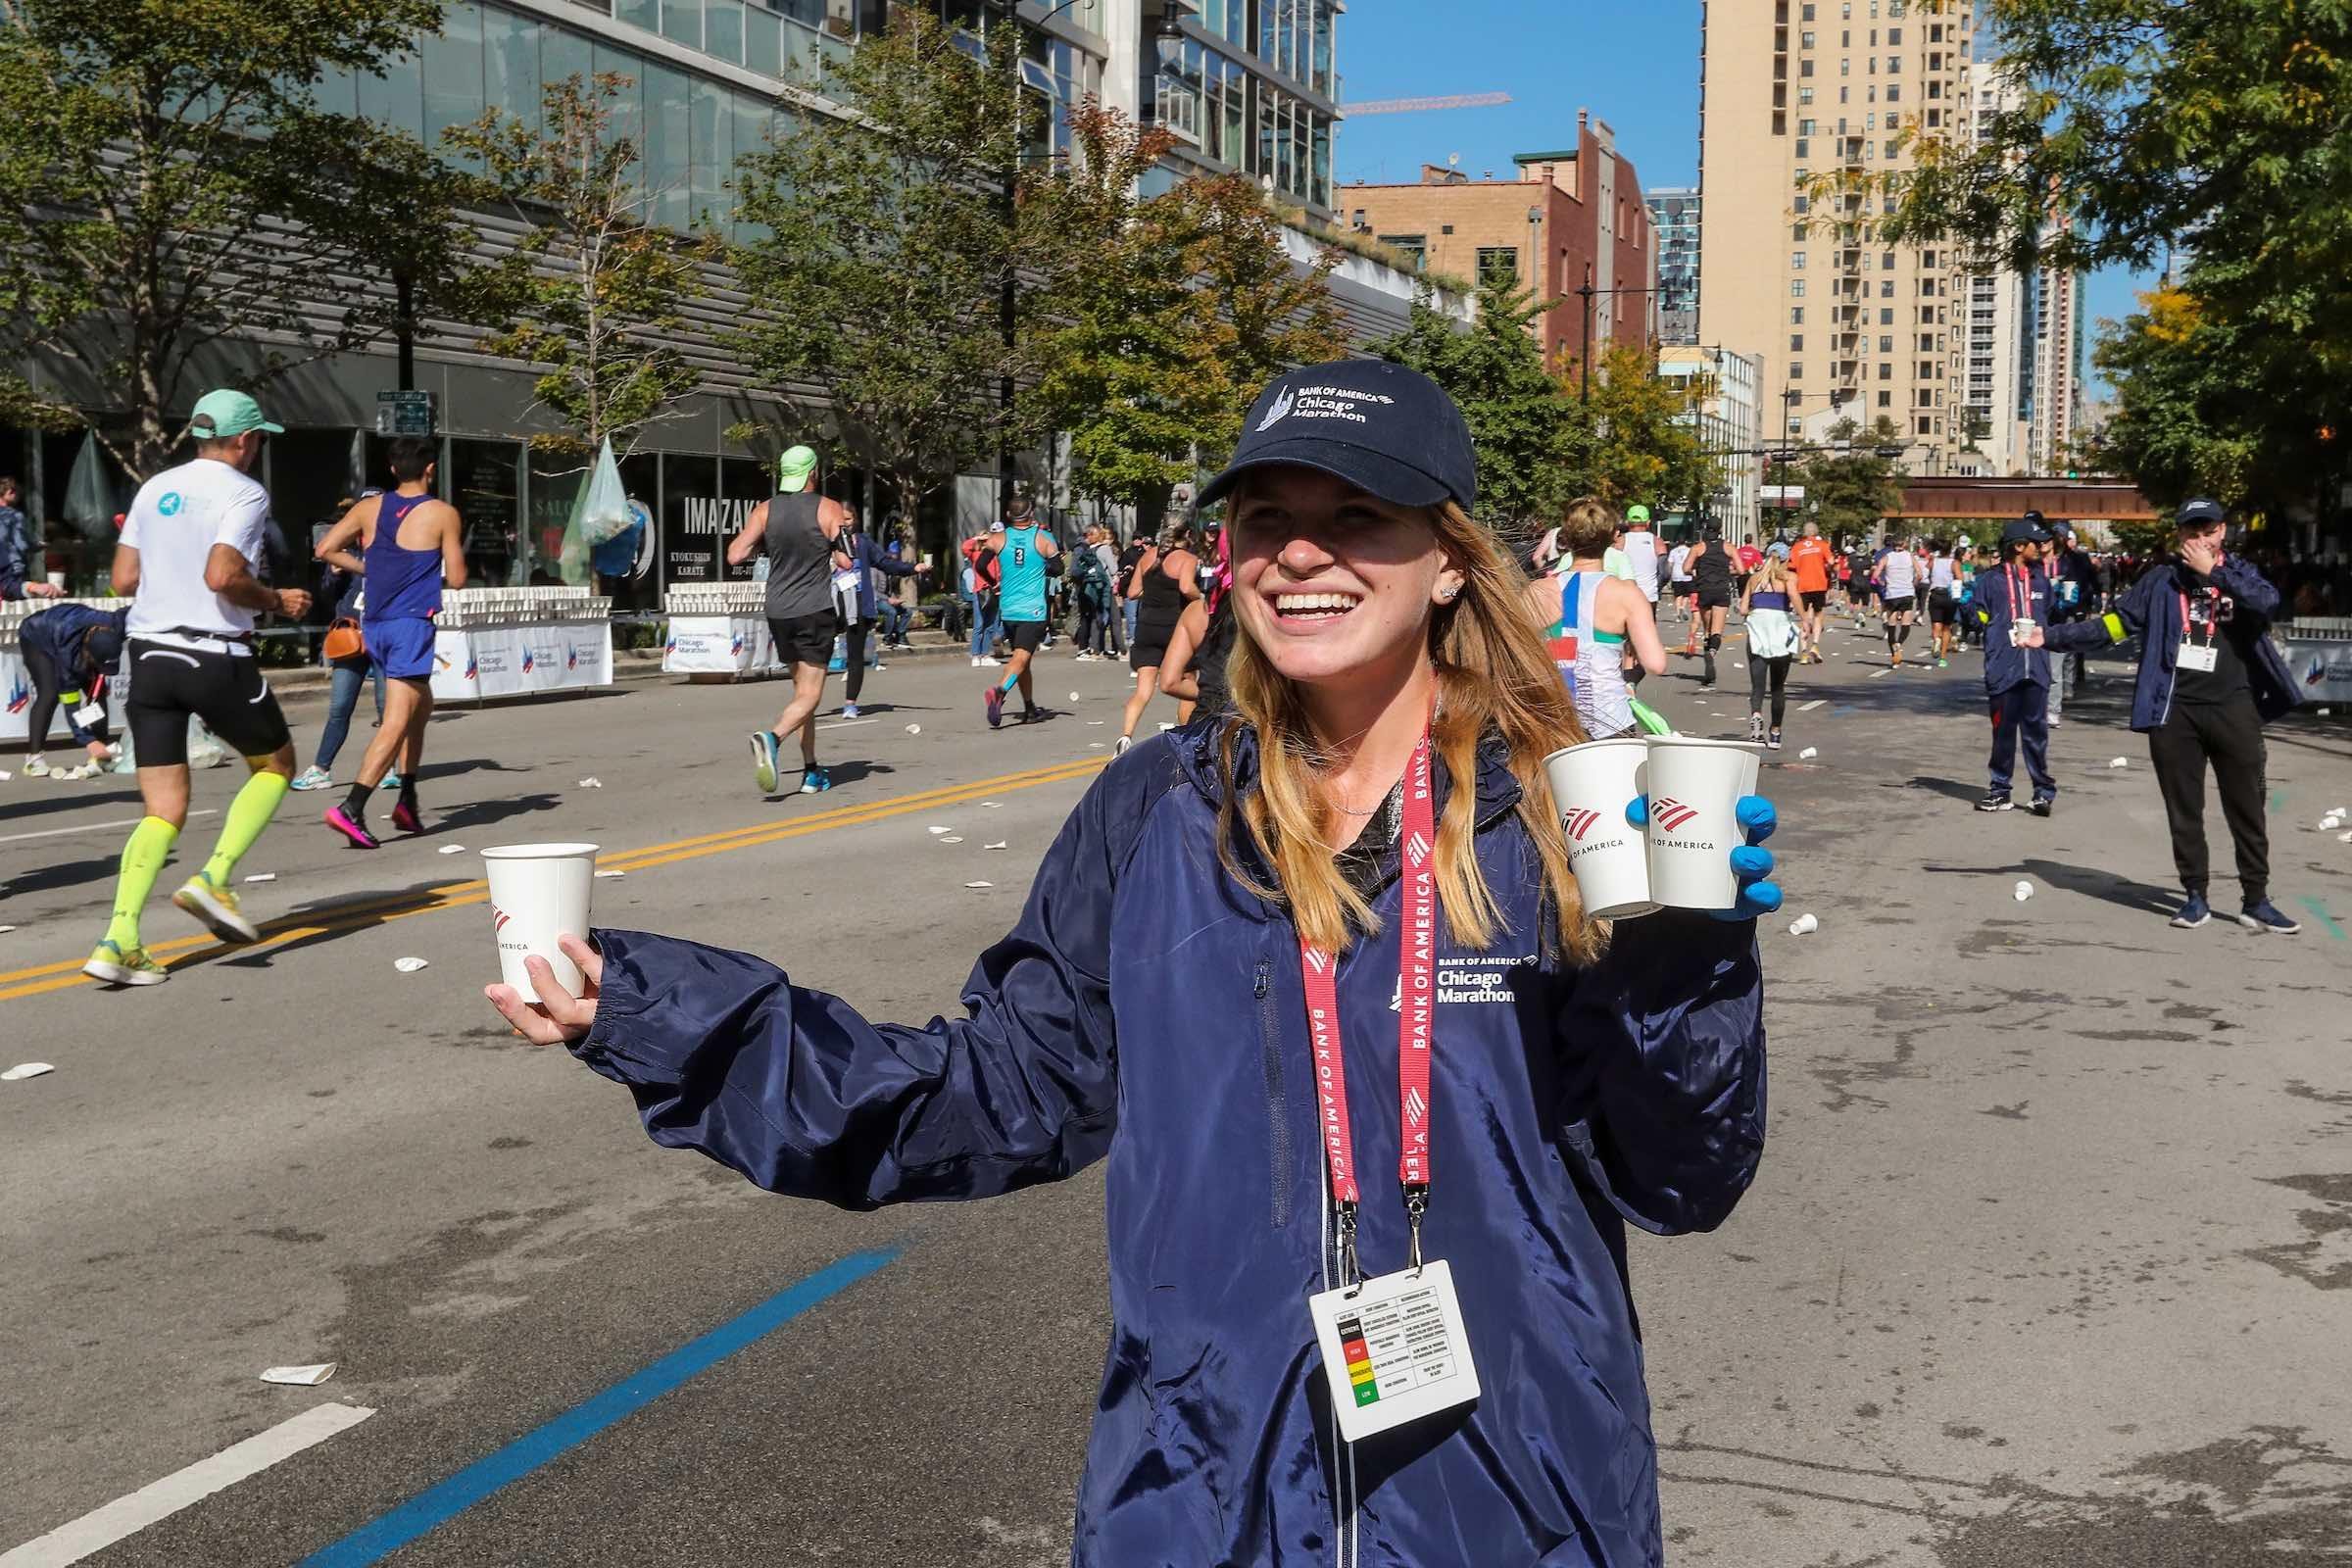 A volunteer hands out water to competitors in 2022. (Kevin Morris / 2022 Bank of America Chicago Marathon)